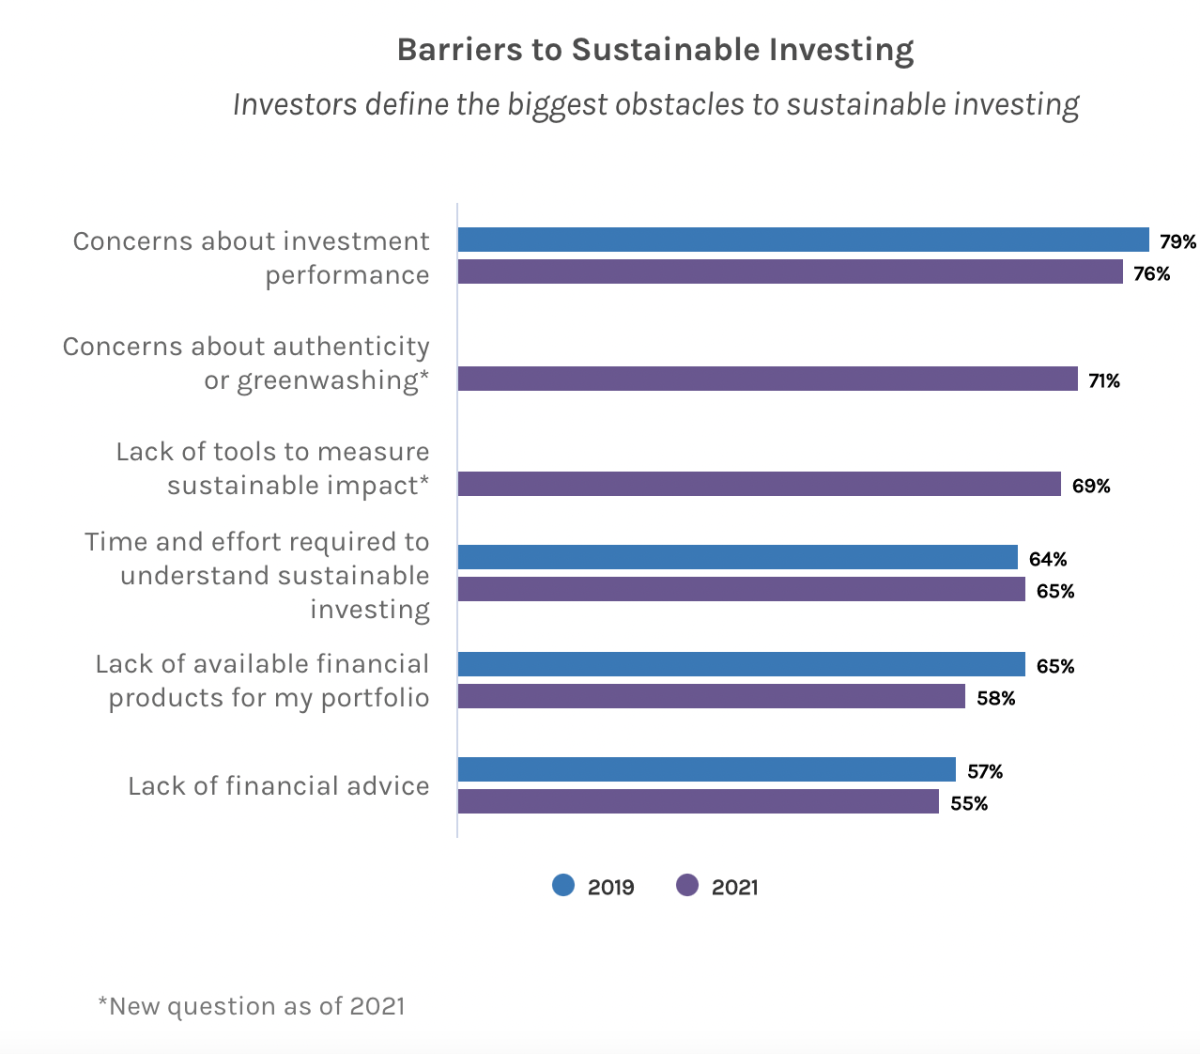 Graph showing barriers to sustainable investing. Criteria shown: Concerns about investment performance, Concerns about greenwashing, 